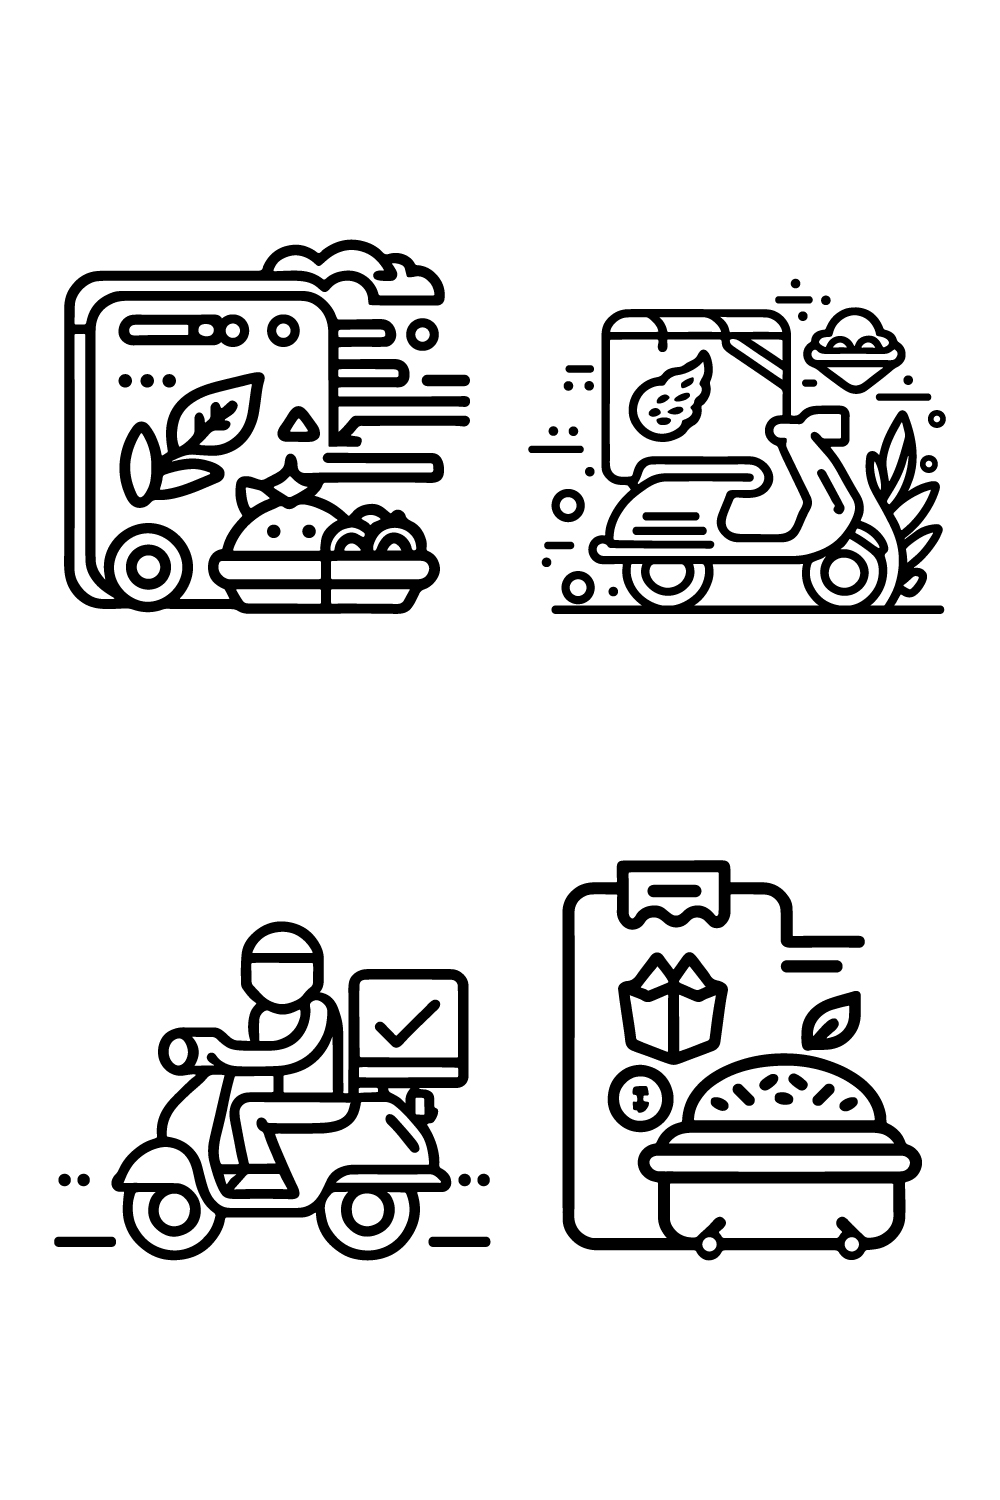 Food Delivery Icon set, line art Black And White food delivery service vector icons, Outline style, and a clean simple design isolated on white background pinterest preview image.